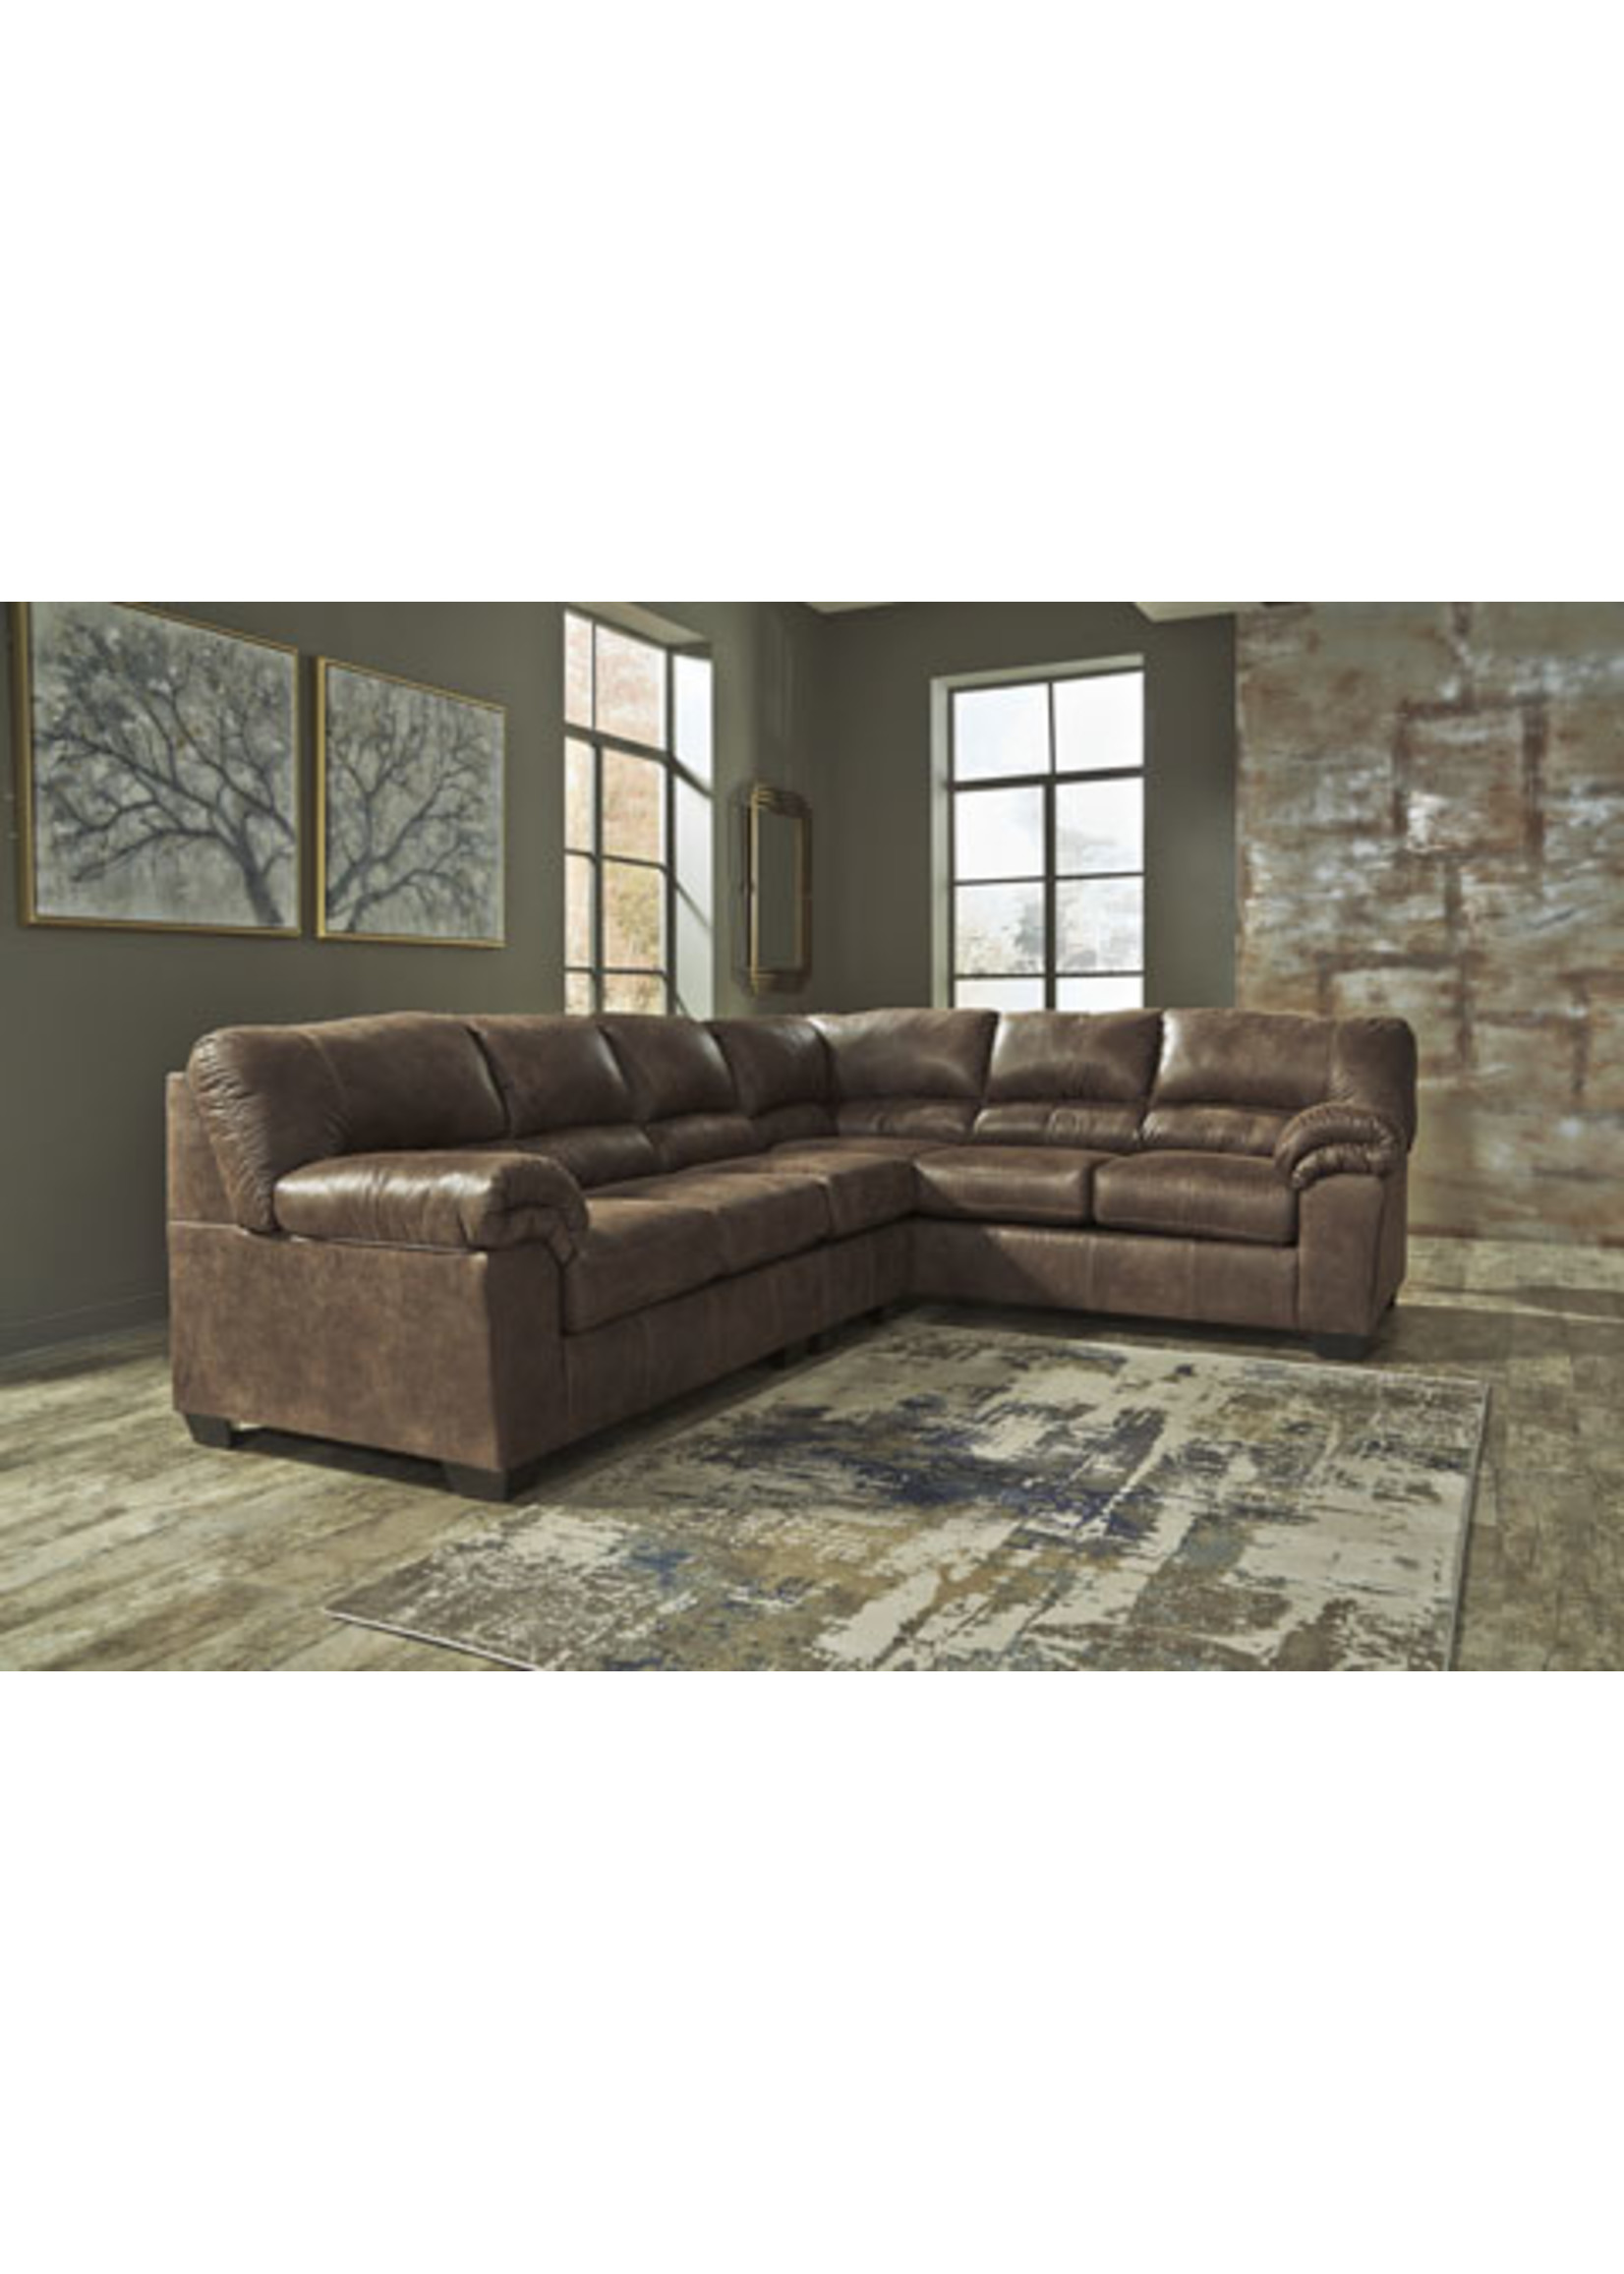 ASHLEY BLADEN 3 PC SECTIONAL COFFEE